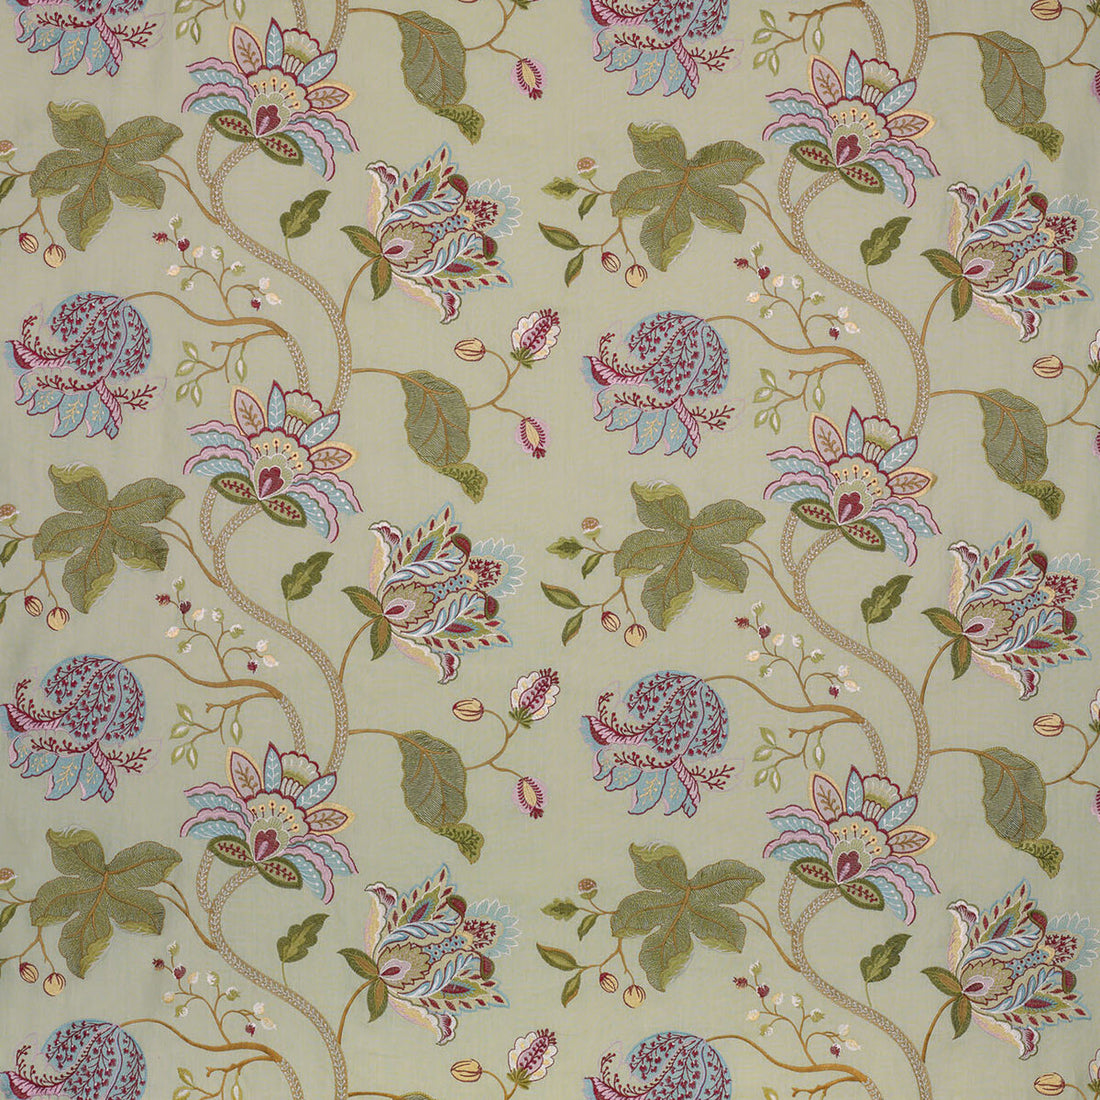 Devereux Linen fabric in eau de nil/multi color - pattern BF10508.1.0 - by G P &amp; J Baker in the Larkhill collection